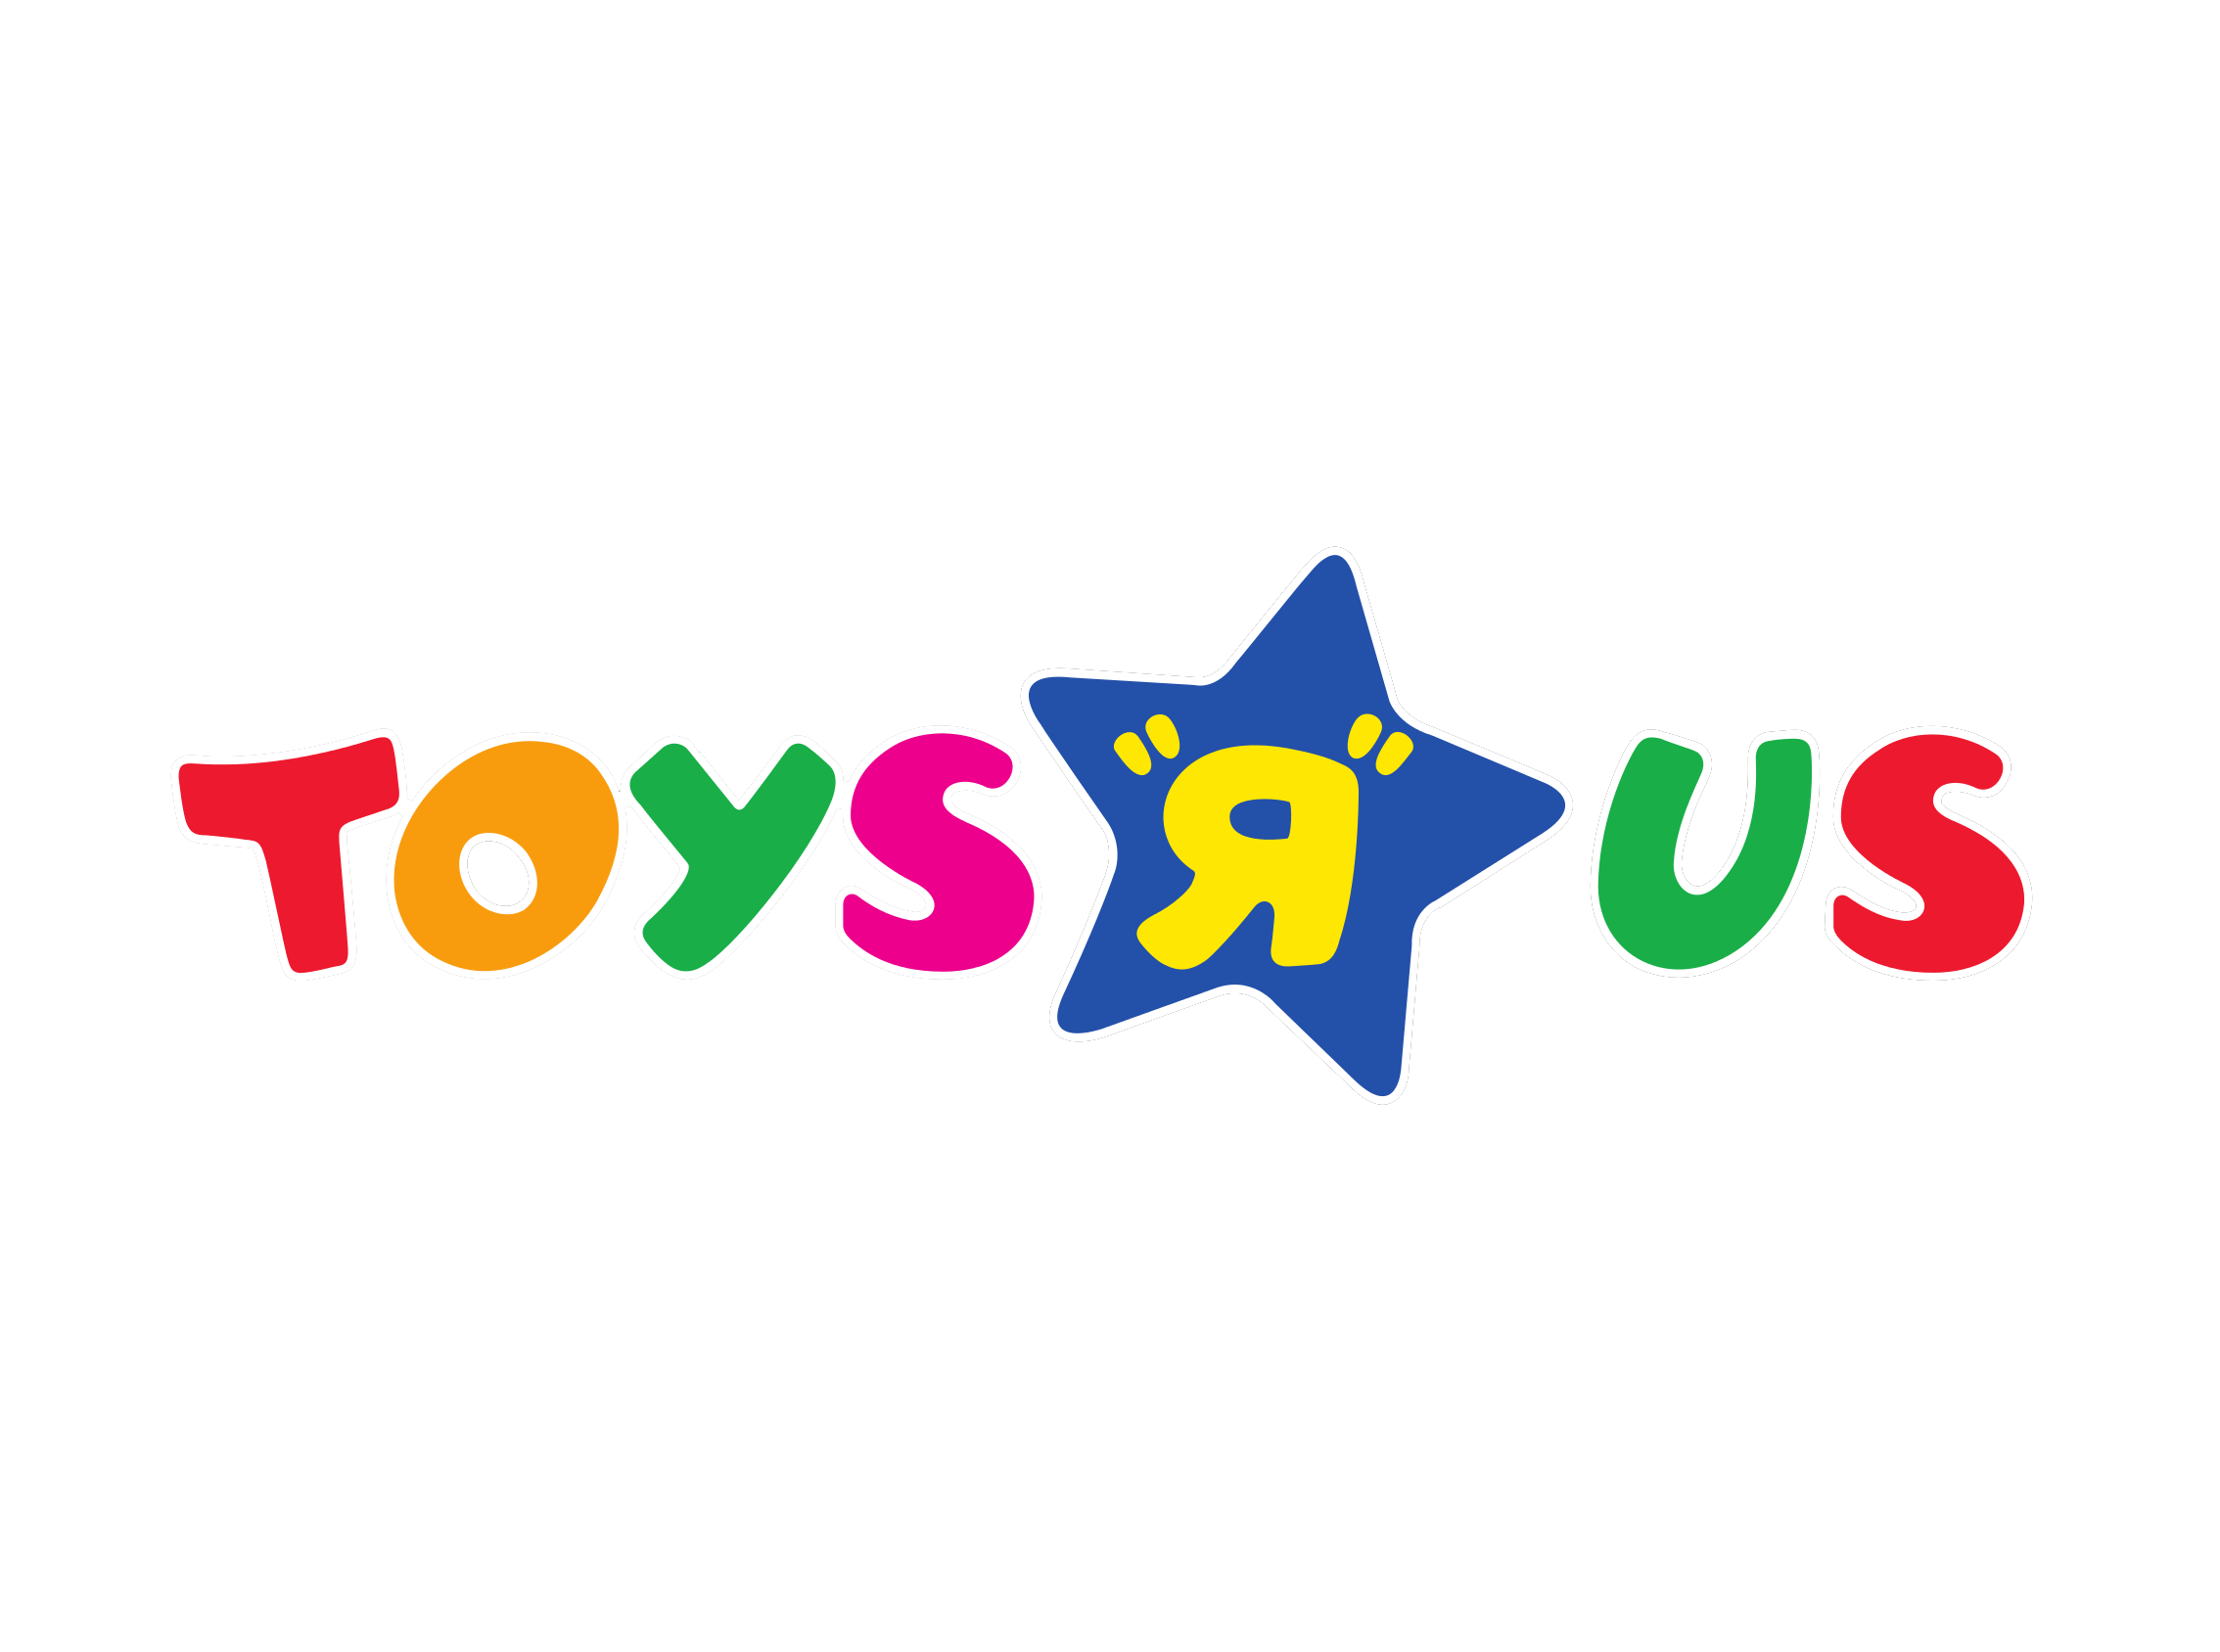 Why is Toys R Us in Bankruptcy